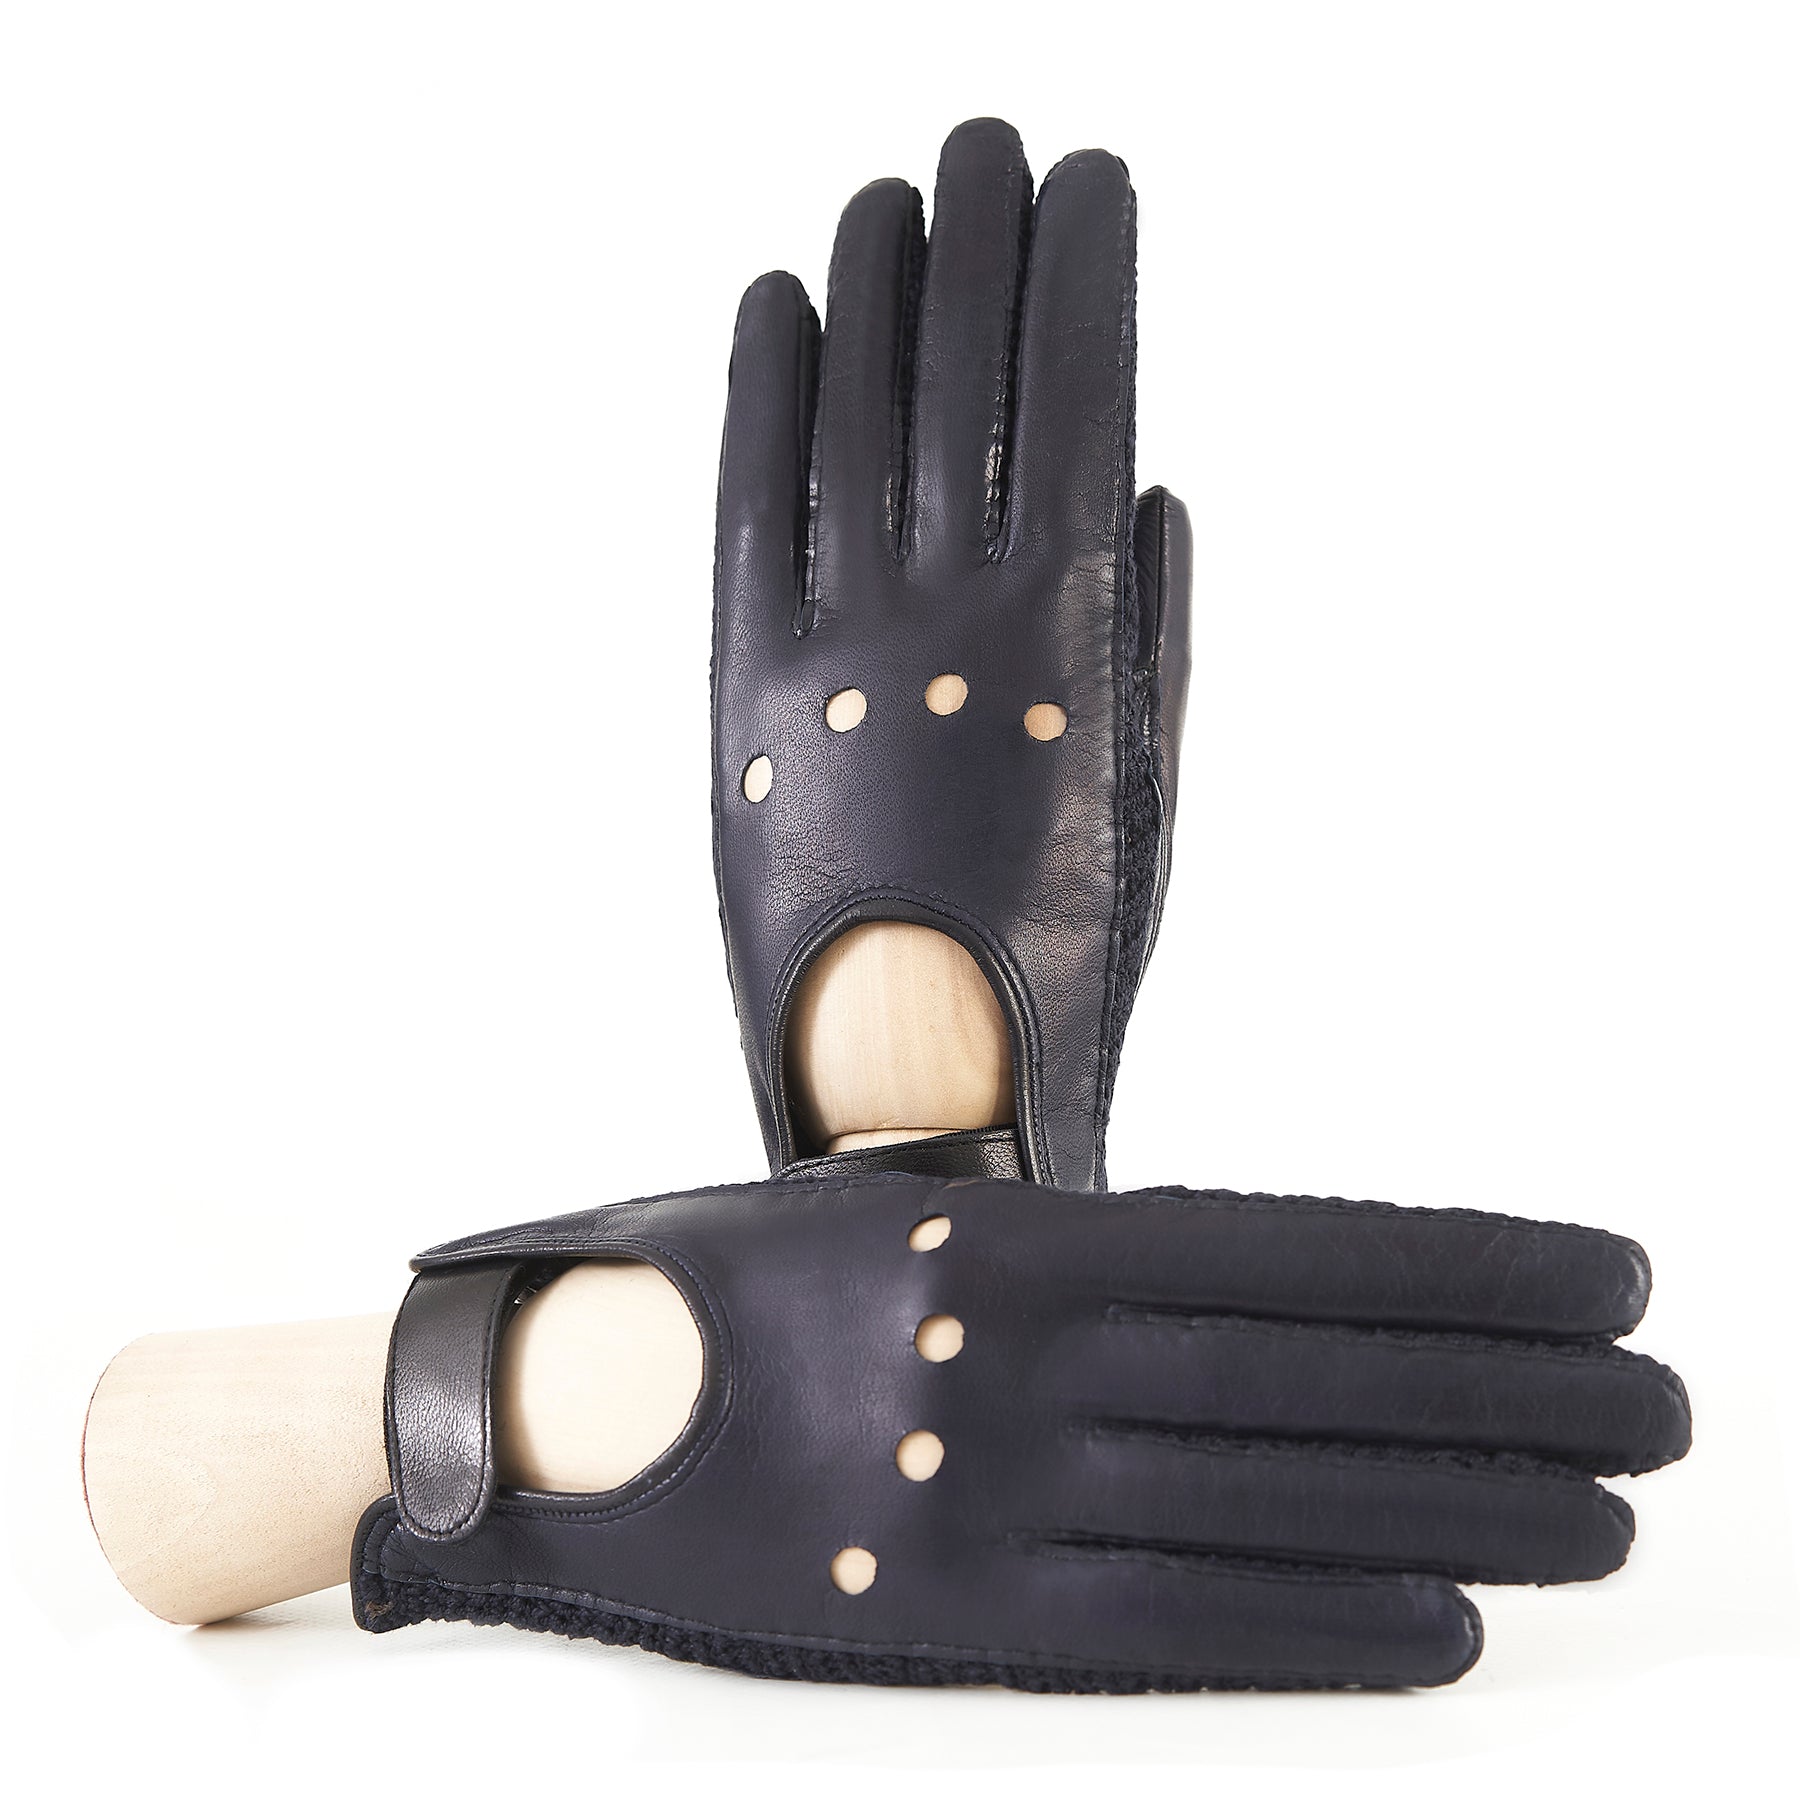 Women's driving gloves in blue navy nappa leather with holes on the knuckles and crochet finger inserts